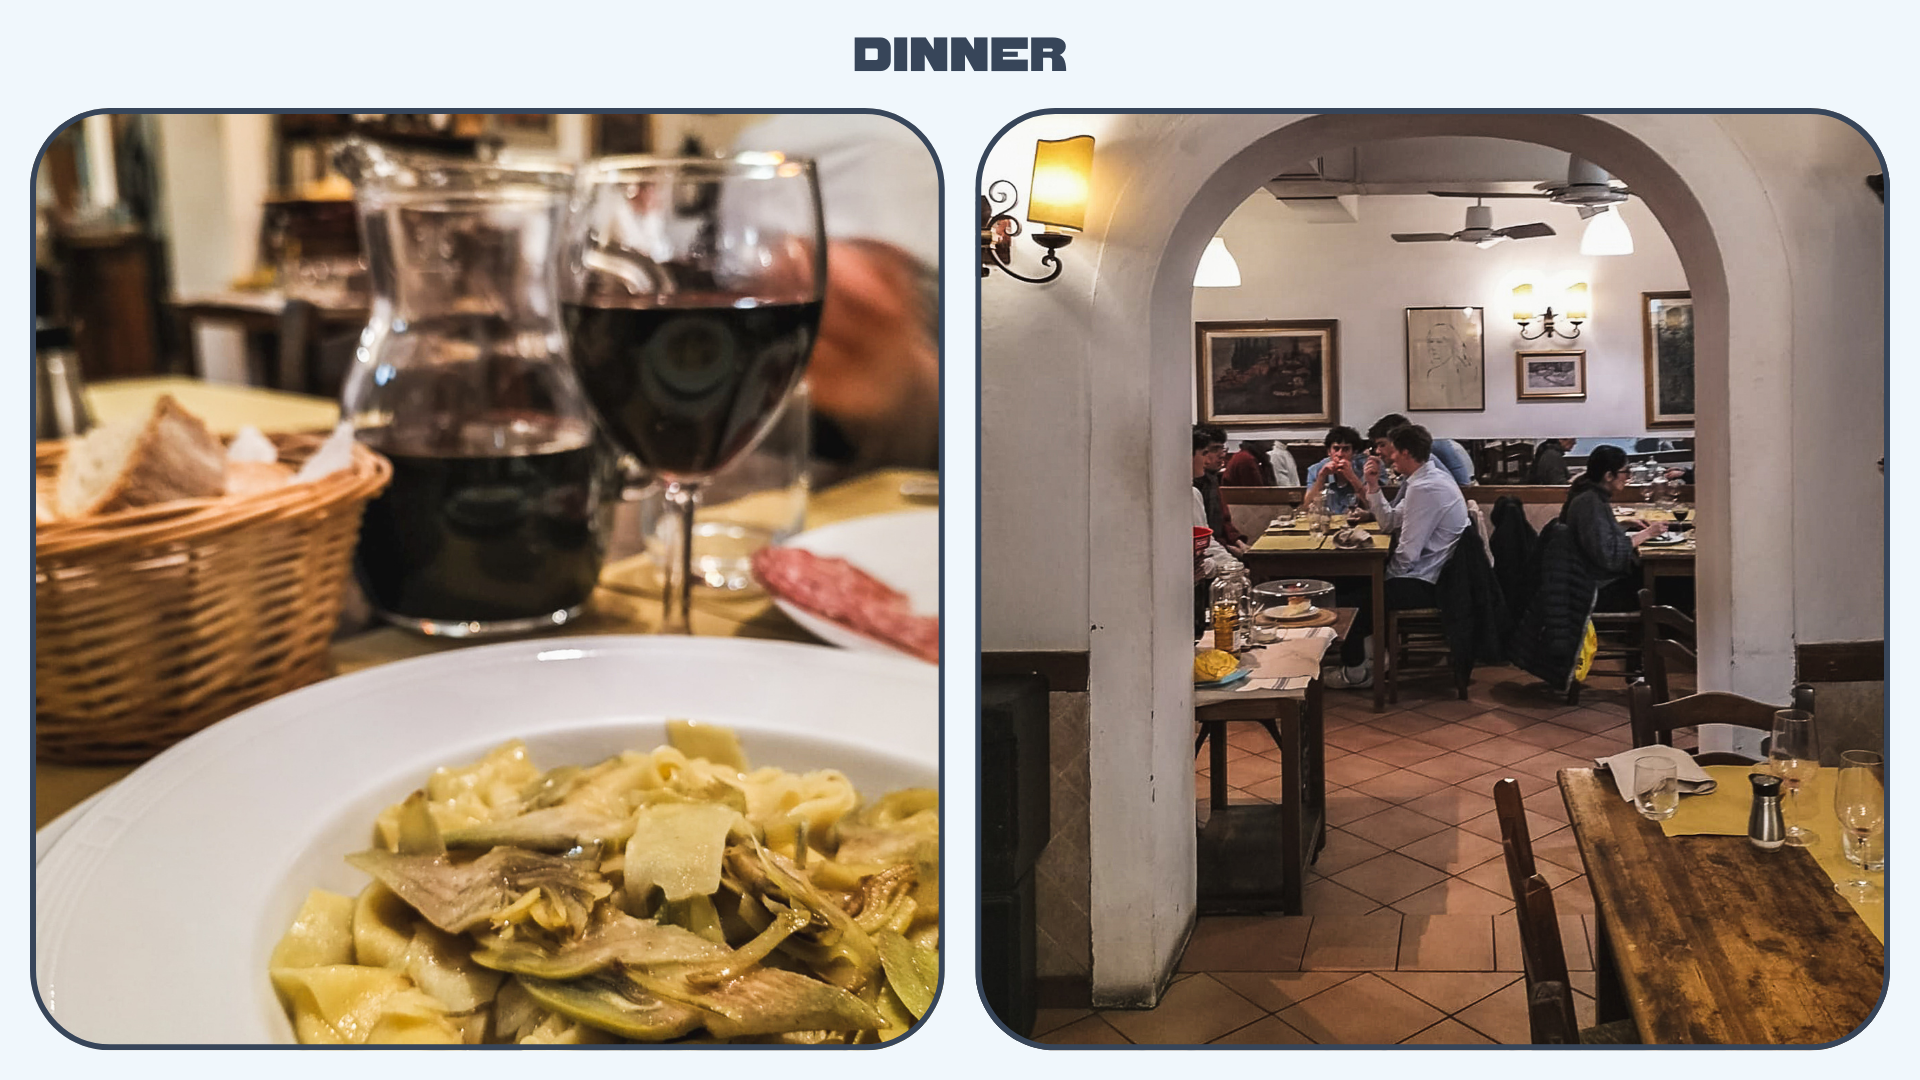 L: Plate of grilled artichokes. R: A group of men sit at a table in an Italian restaurant